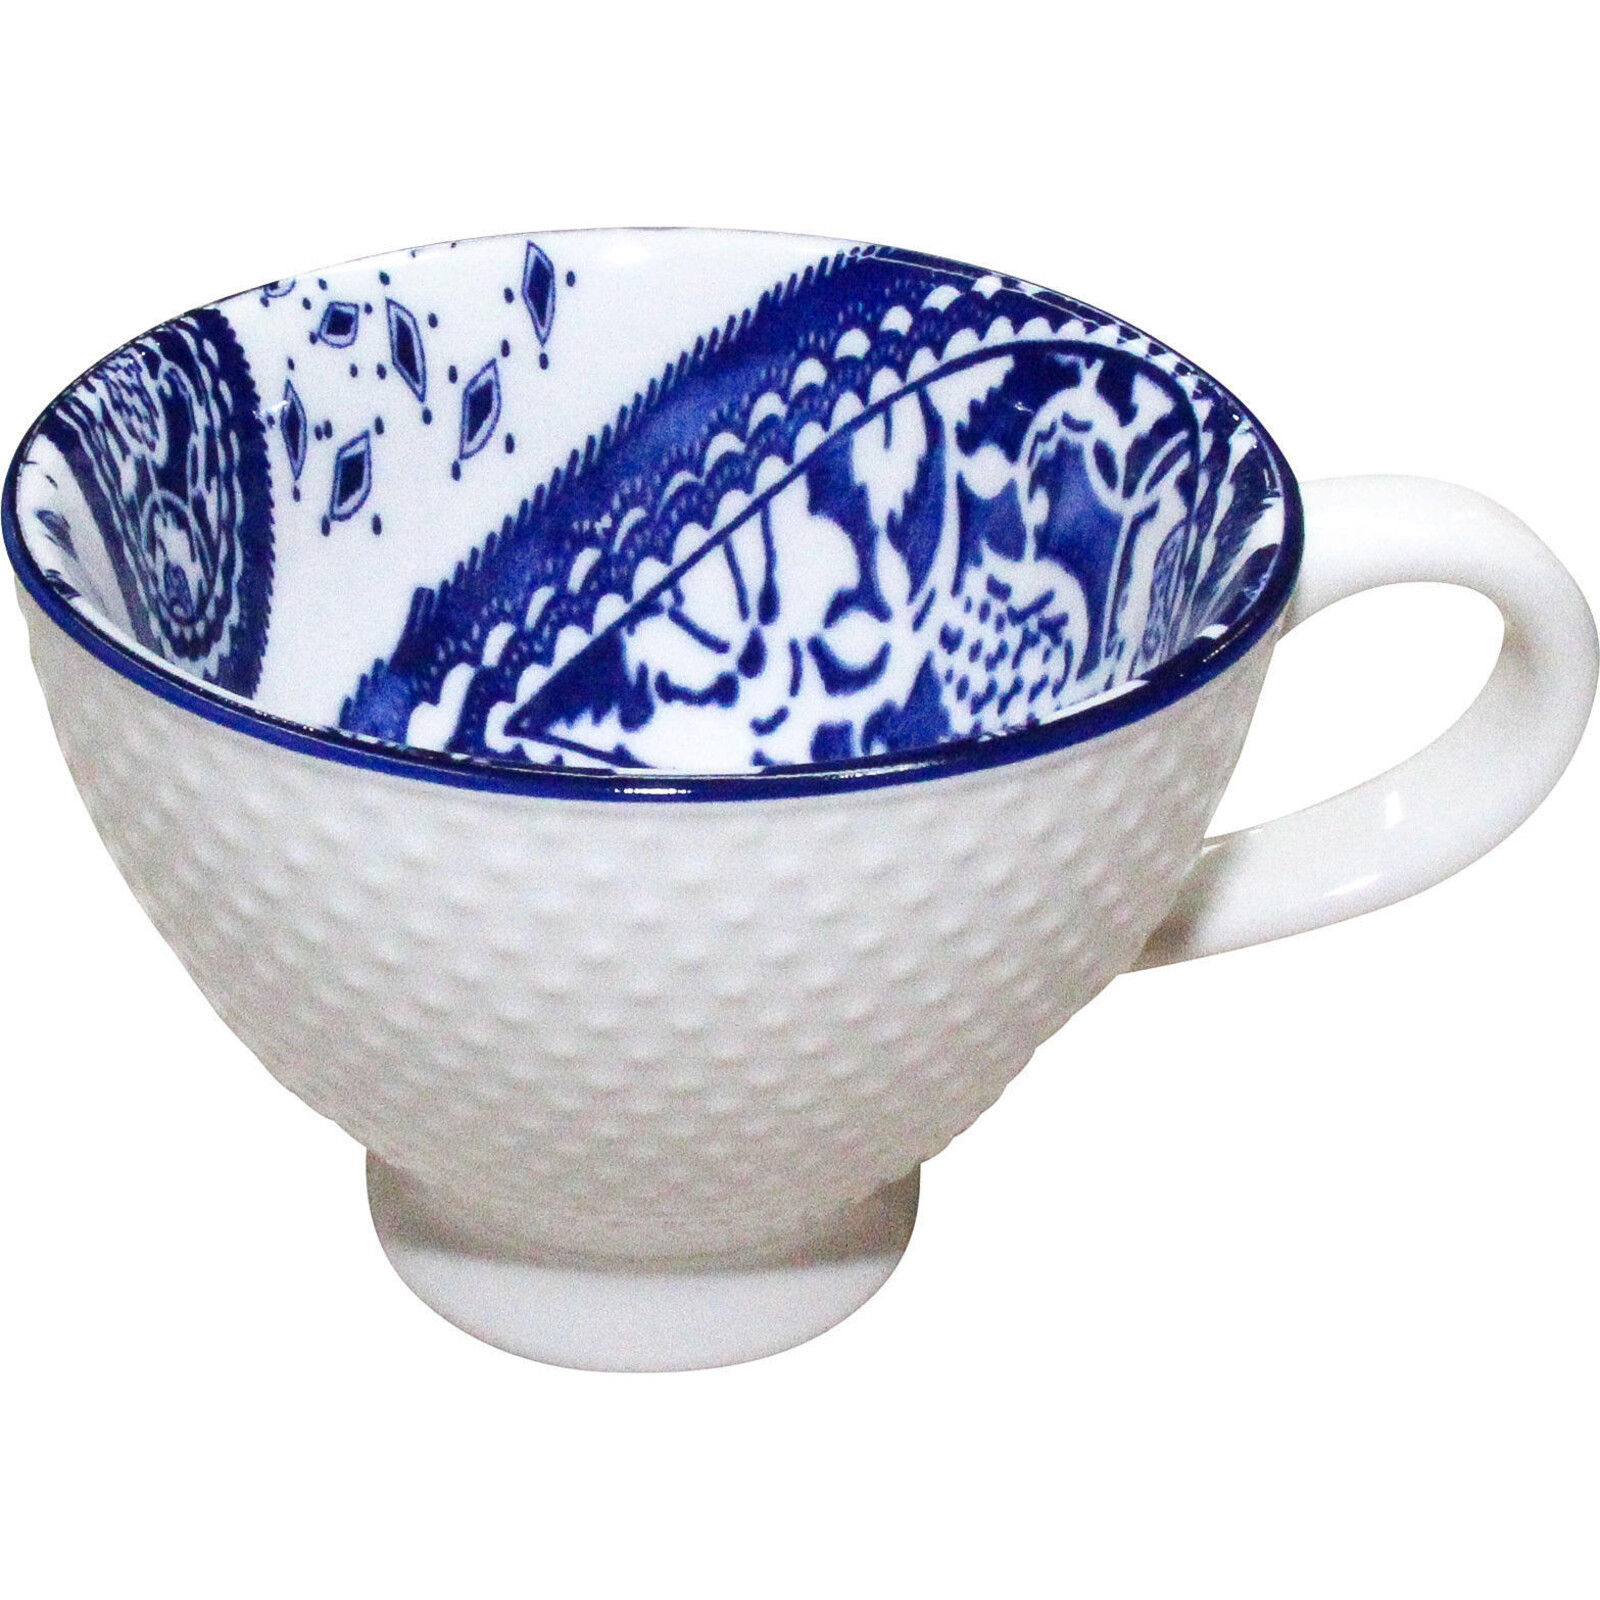 Cup Large Blue Paisley